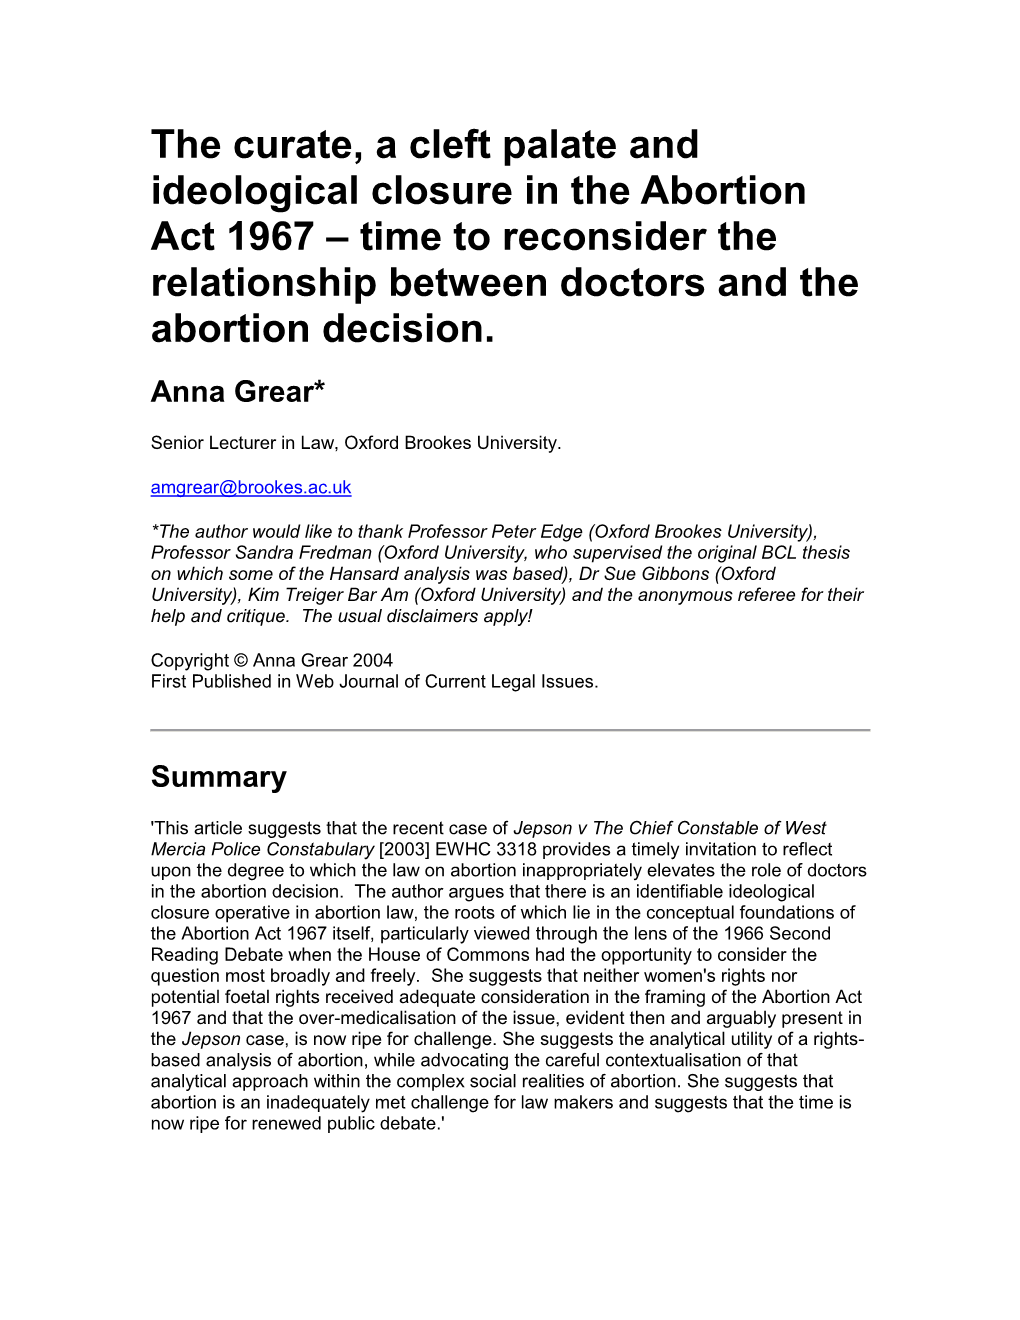 The Curate, a Cleft Palate and Ideological Closure in the Abortion Act 1967 – Time to Reconsider the Relationship Between Doctors and the Abortion Decision